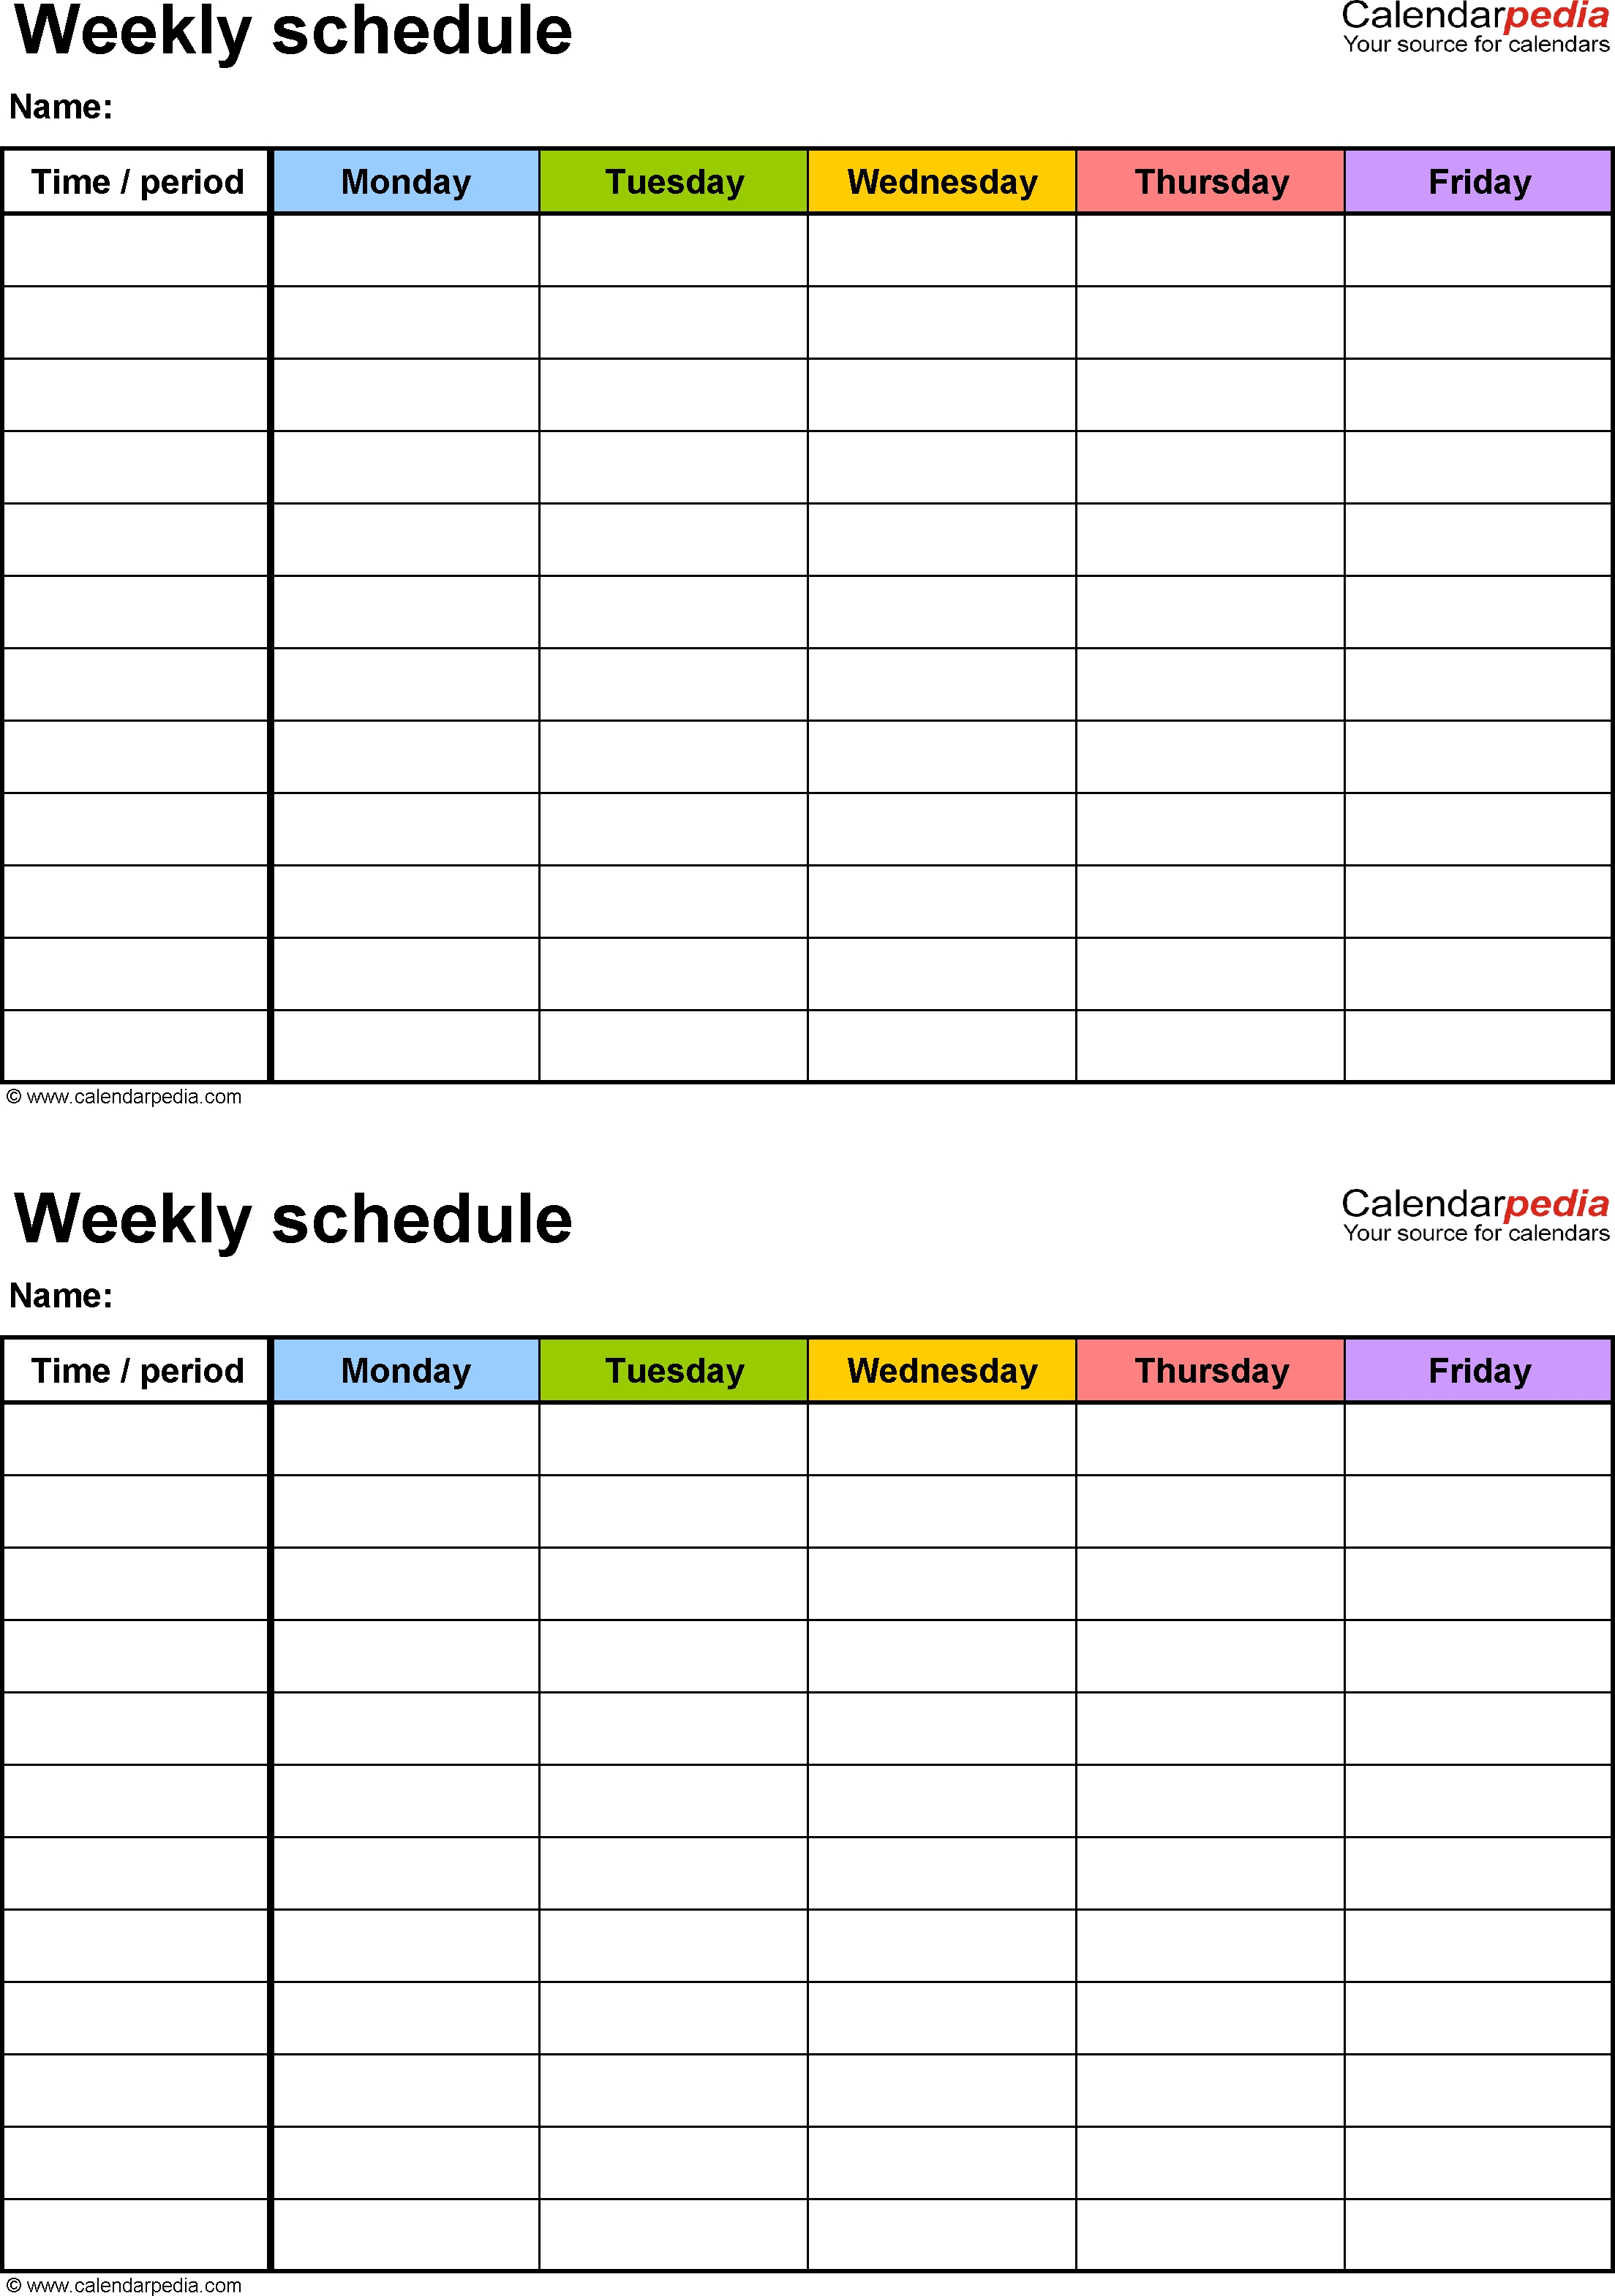 Free Weekly Schedule Templates For Word - 18 Templates-4 Day Work Week Template